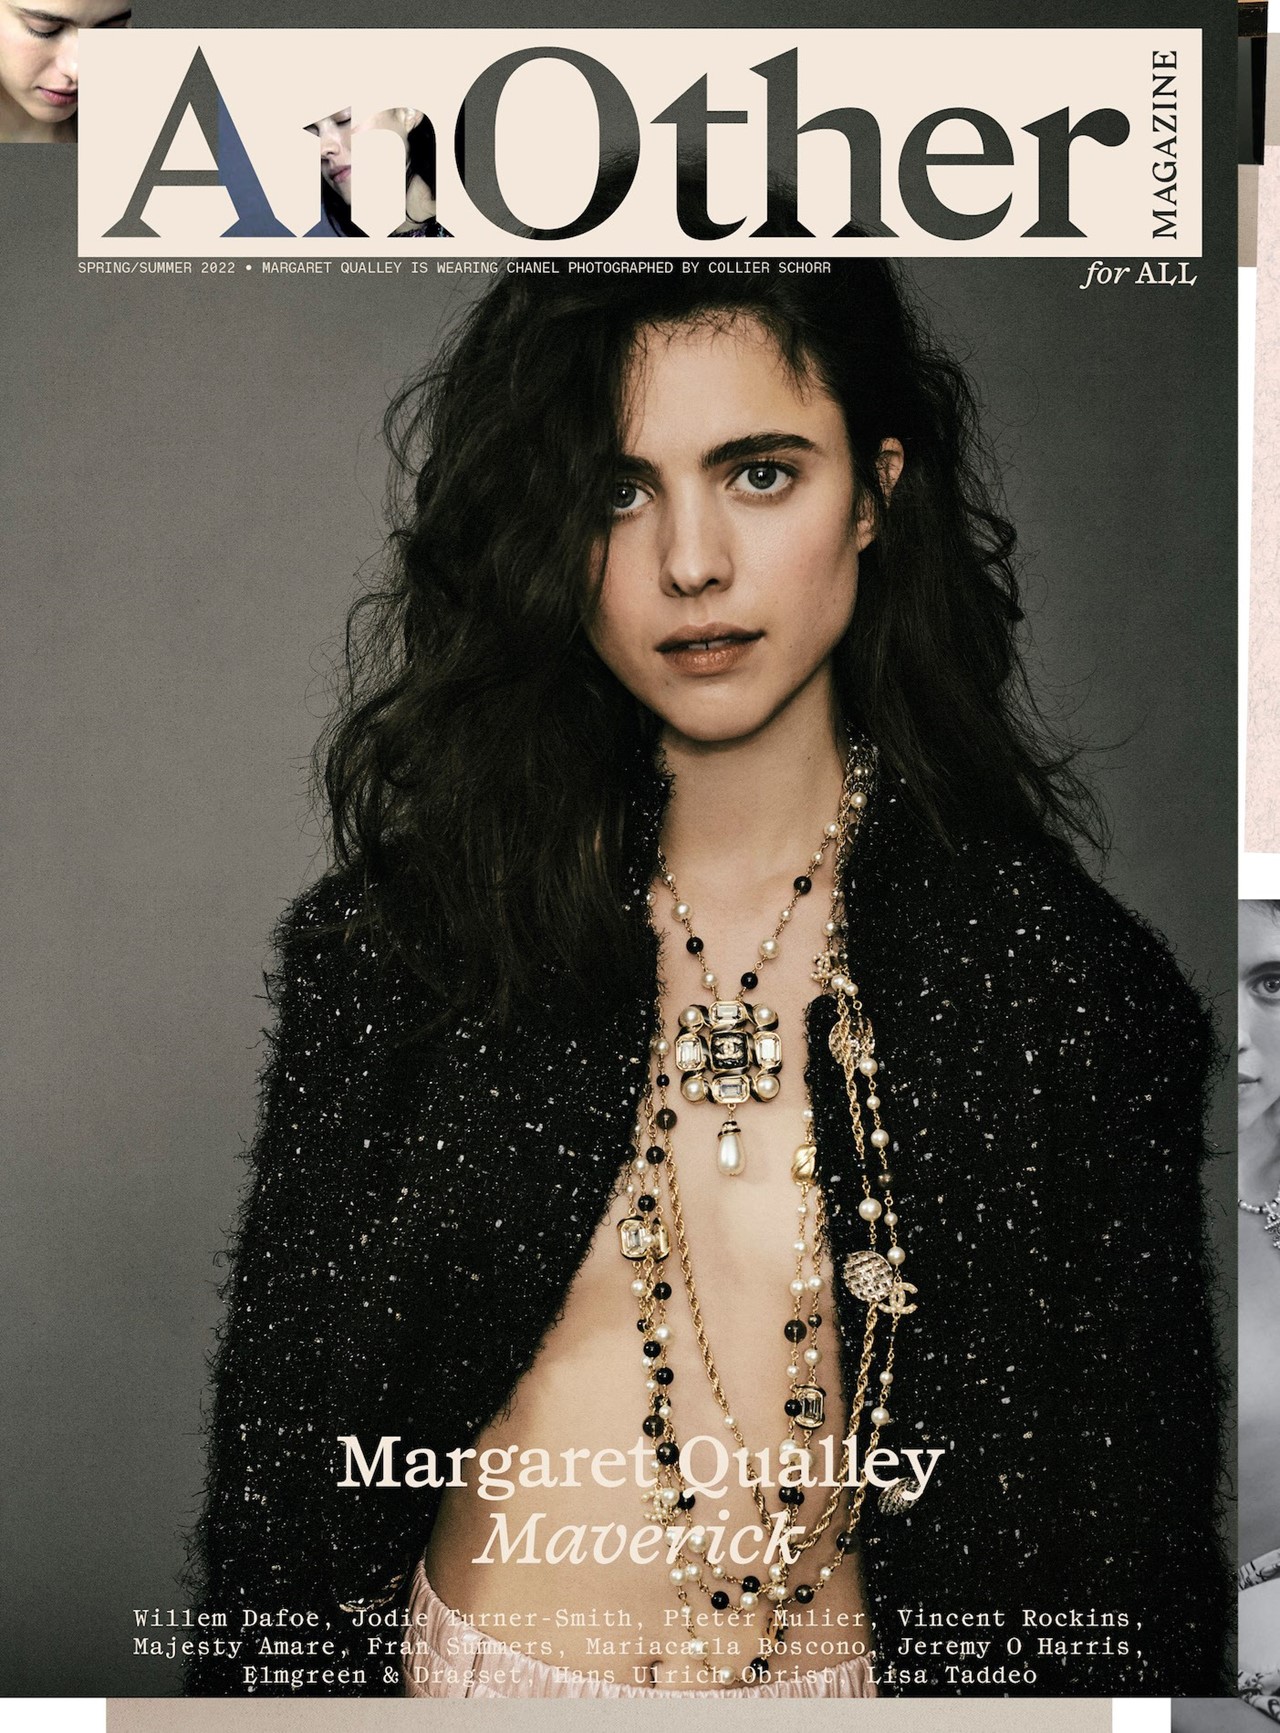 You're Supposed to Be Messy”: Margaret Qualley Is a Maverick in